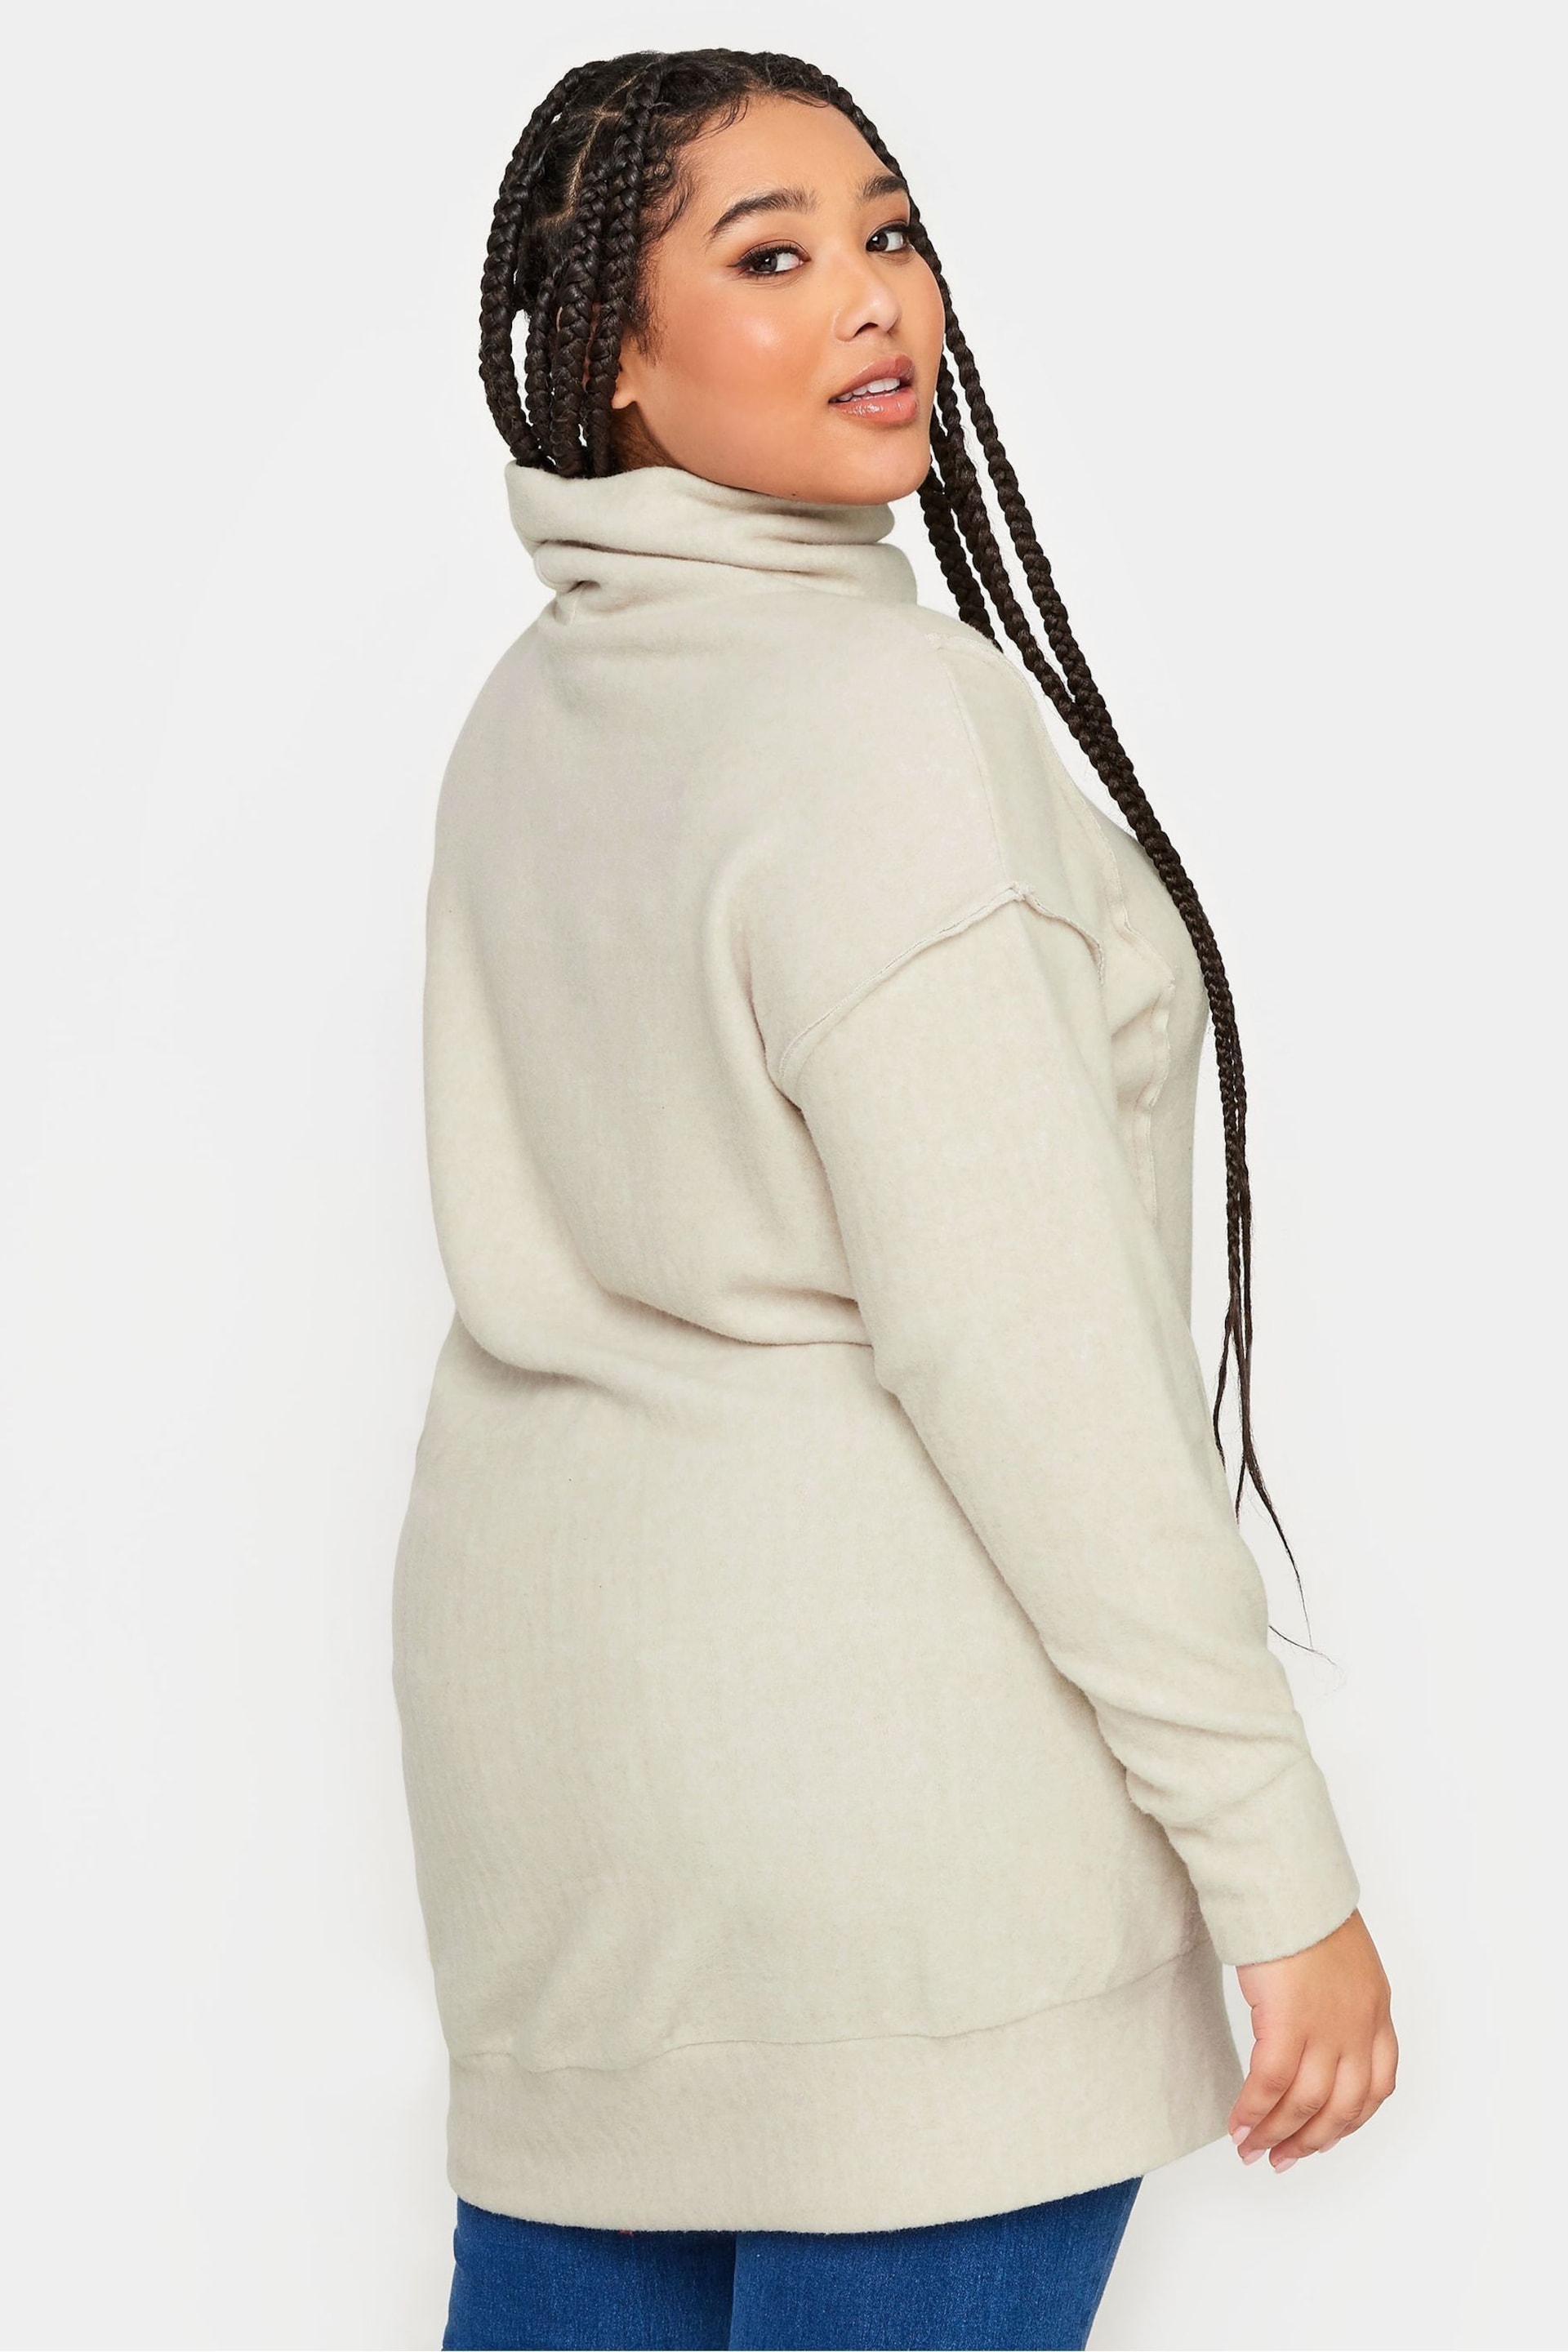 Yours Curve Natural Soft Touch Turtle Neck Sweatshirt - Image 2 of 4